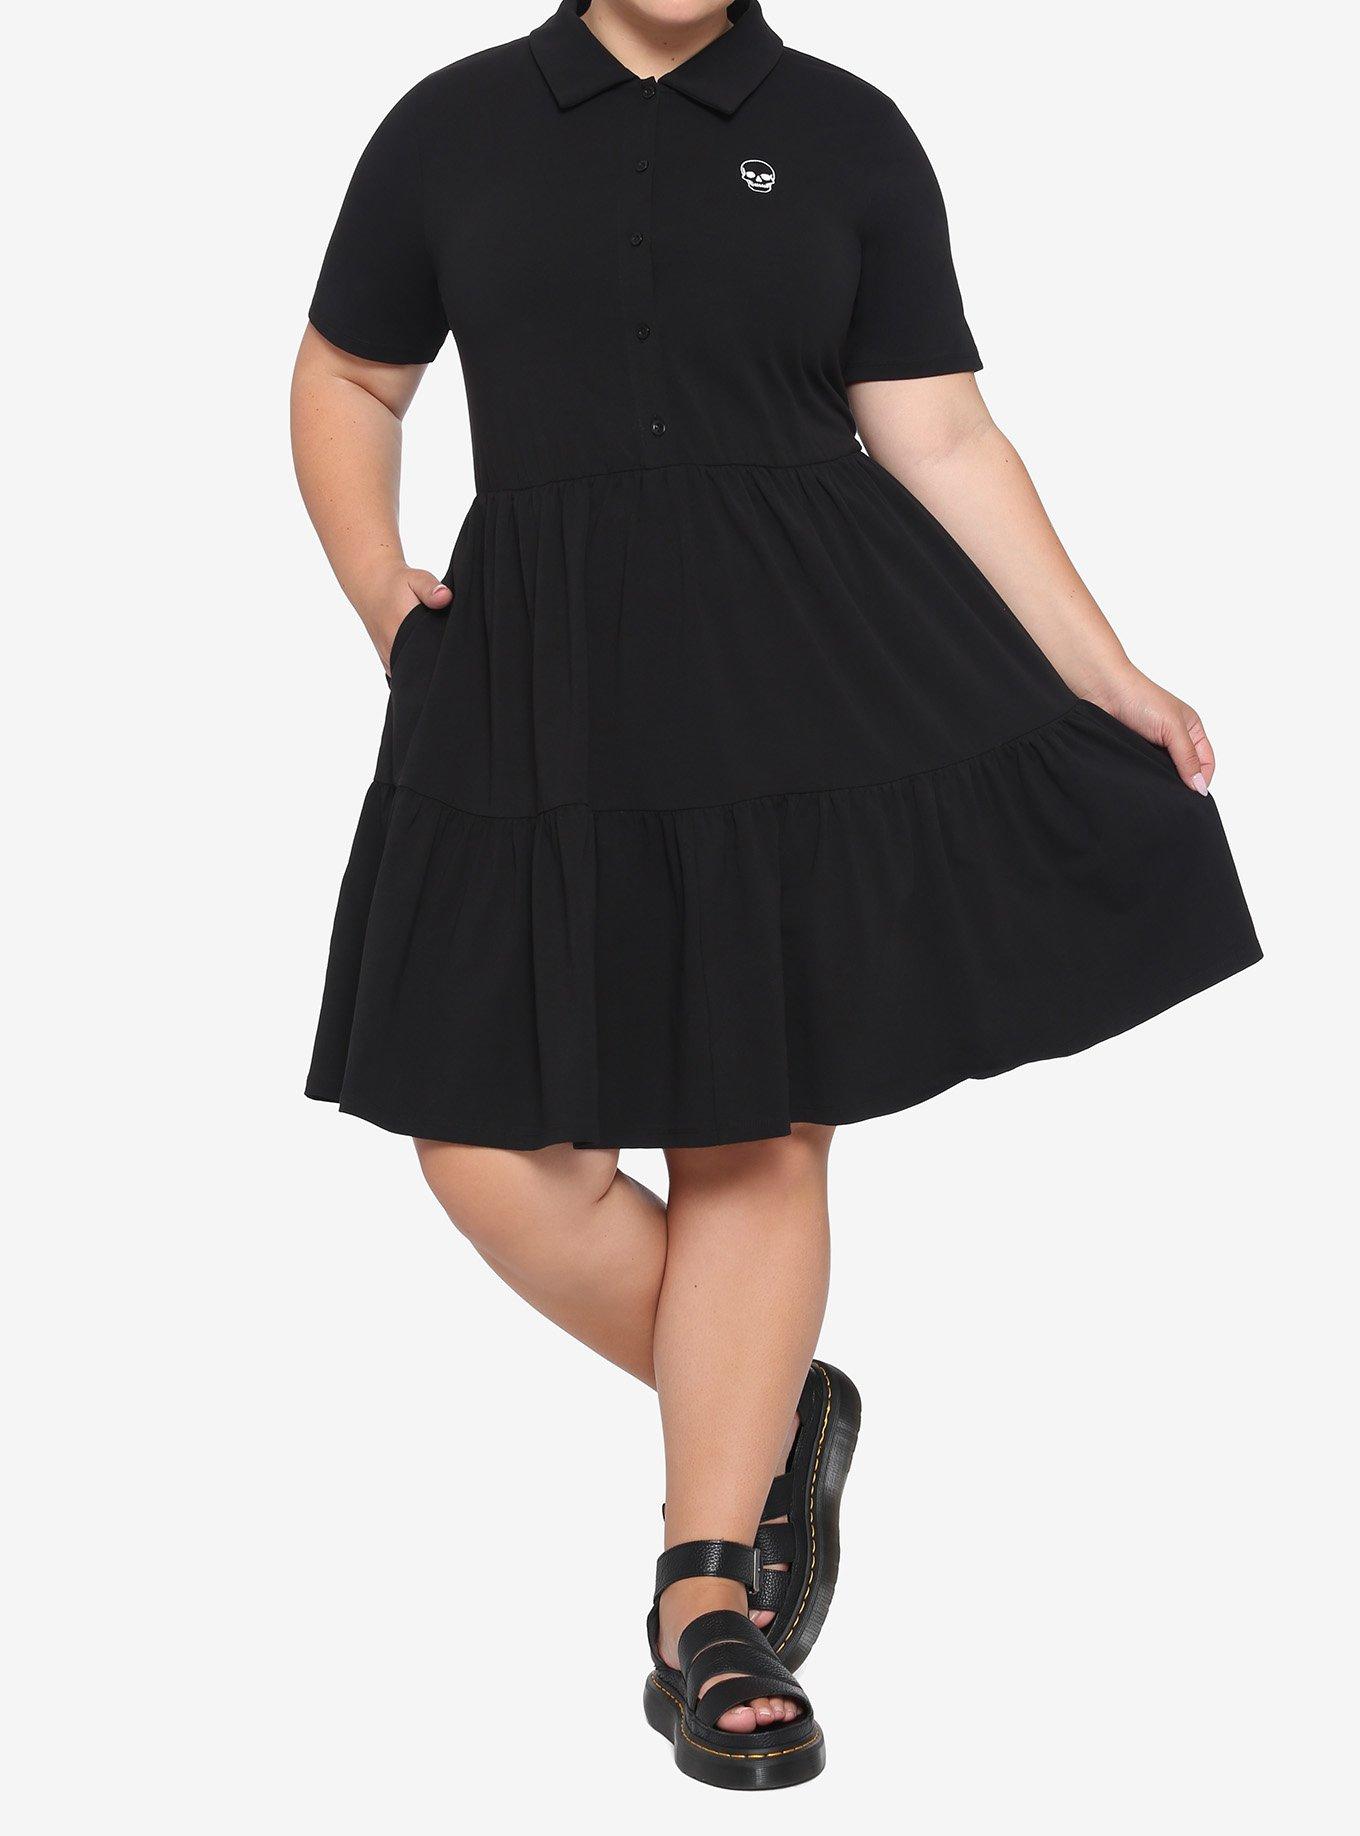 Black Embroidered Skull Polo Tiered Dress Plus Size, BLACK, alternate